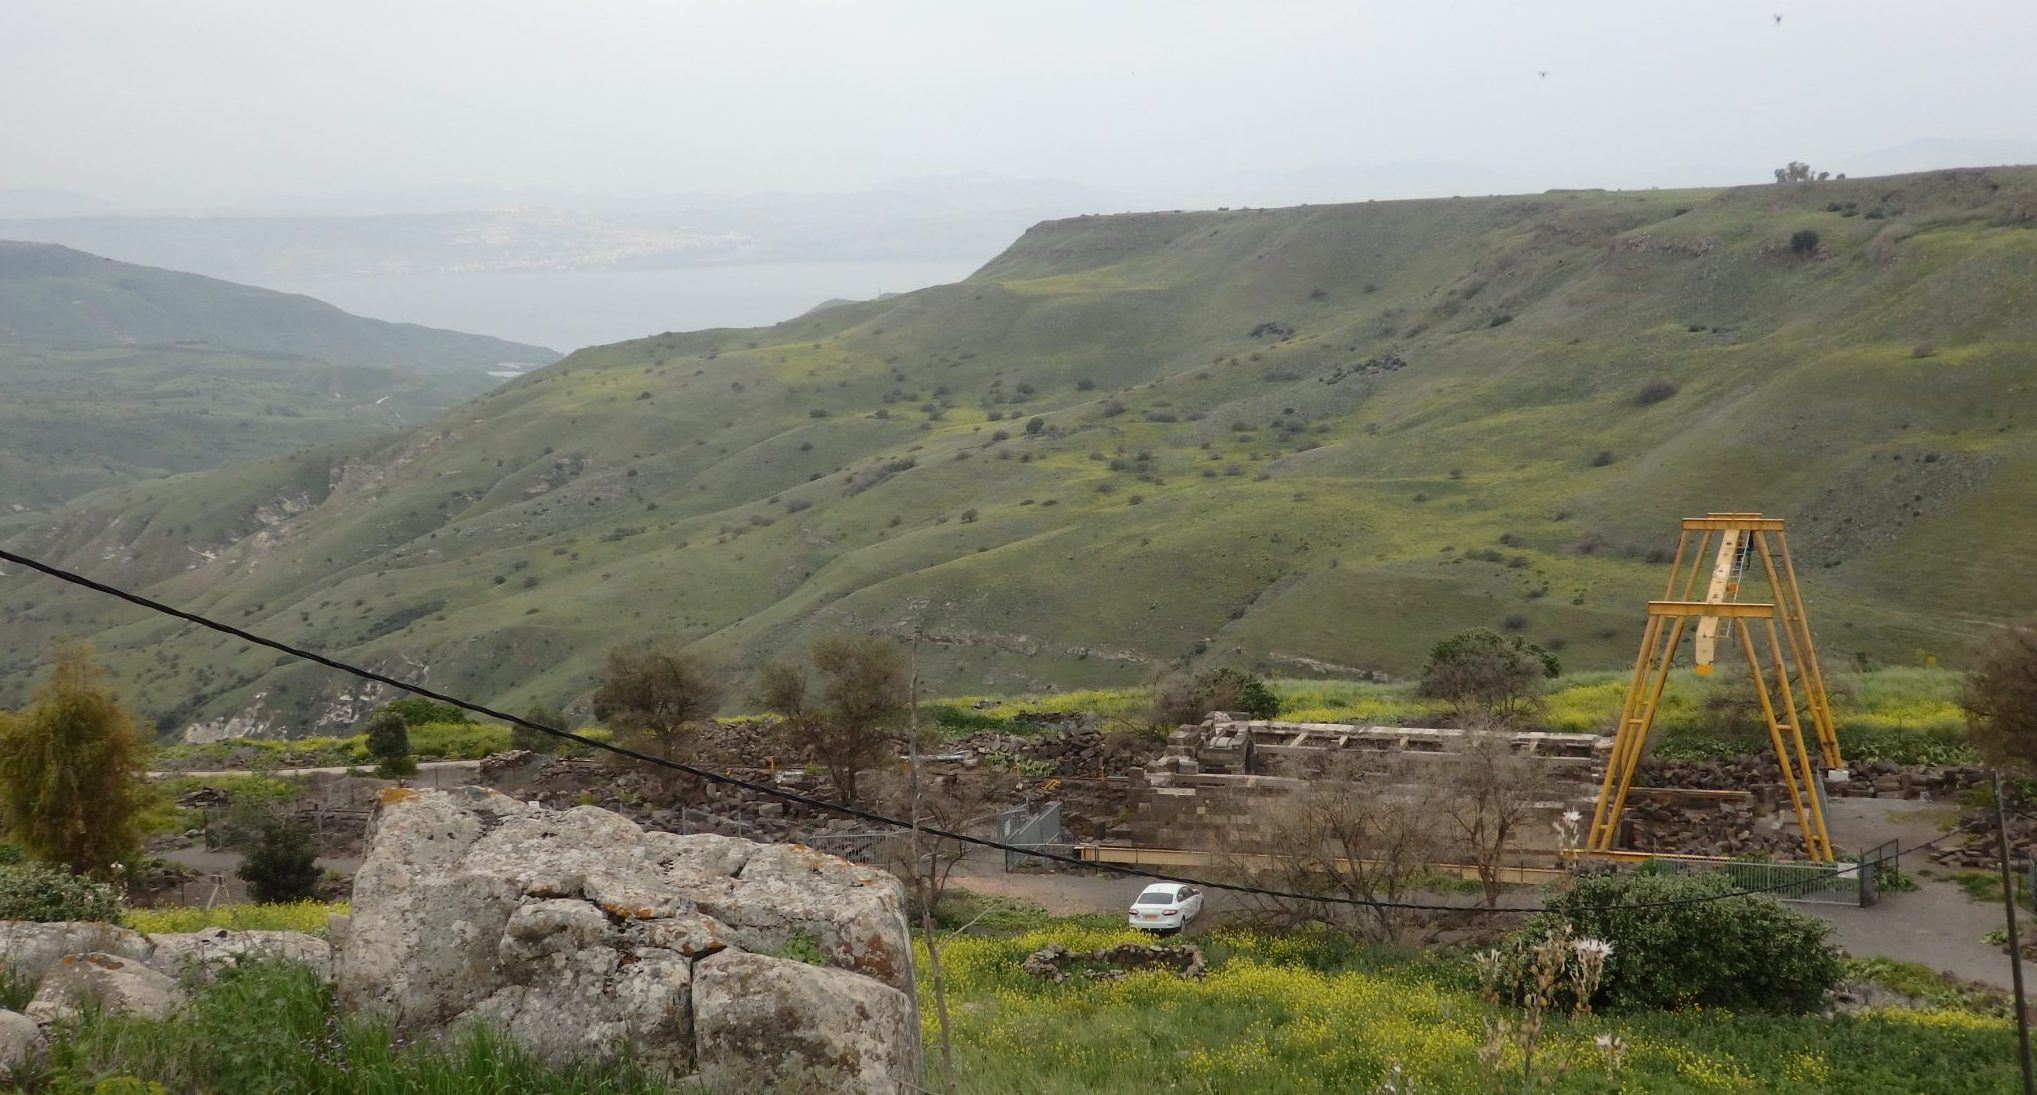 his is the view over the hills of the Golan Heights that opened up once I had descended a short distance down the path from the parking lot. You can see the Sea of Galilee in the haze in the distance. In the foreground is the ruin of the Um el Kanatir synagogue.